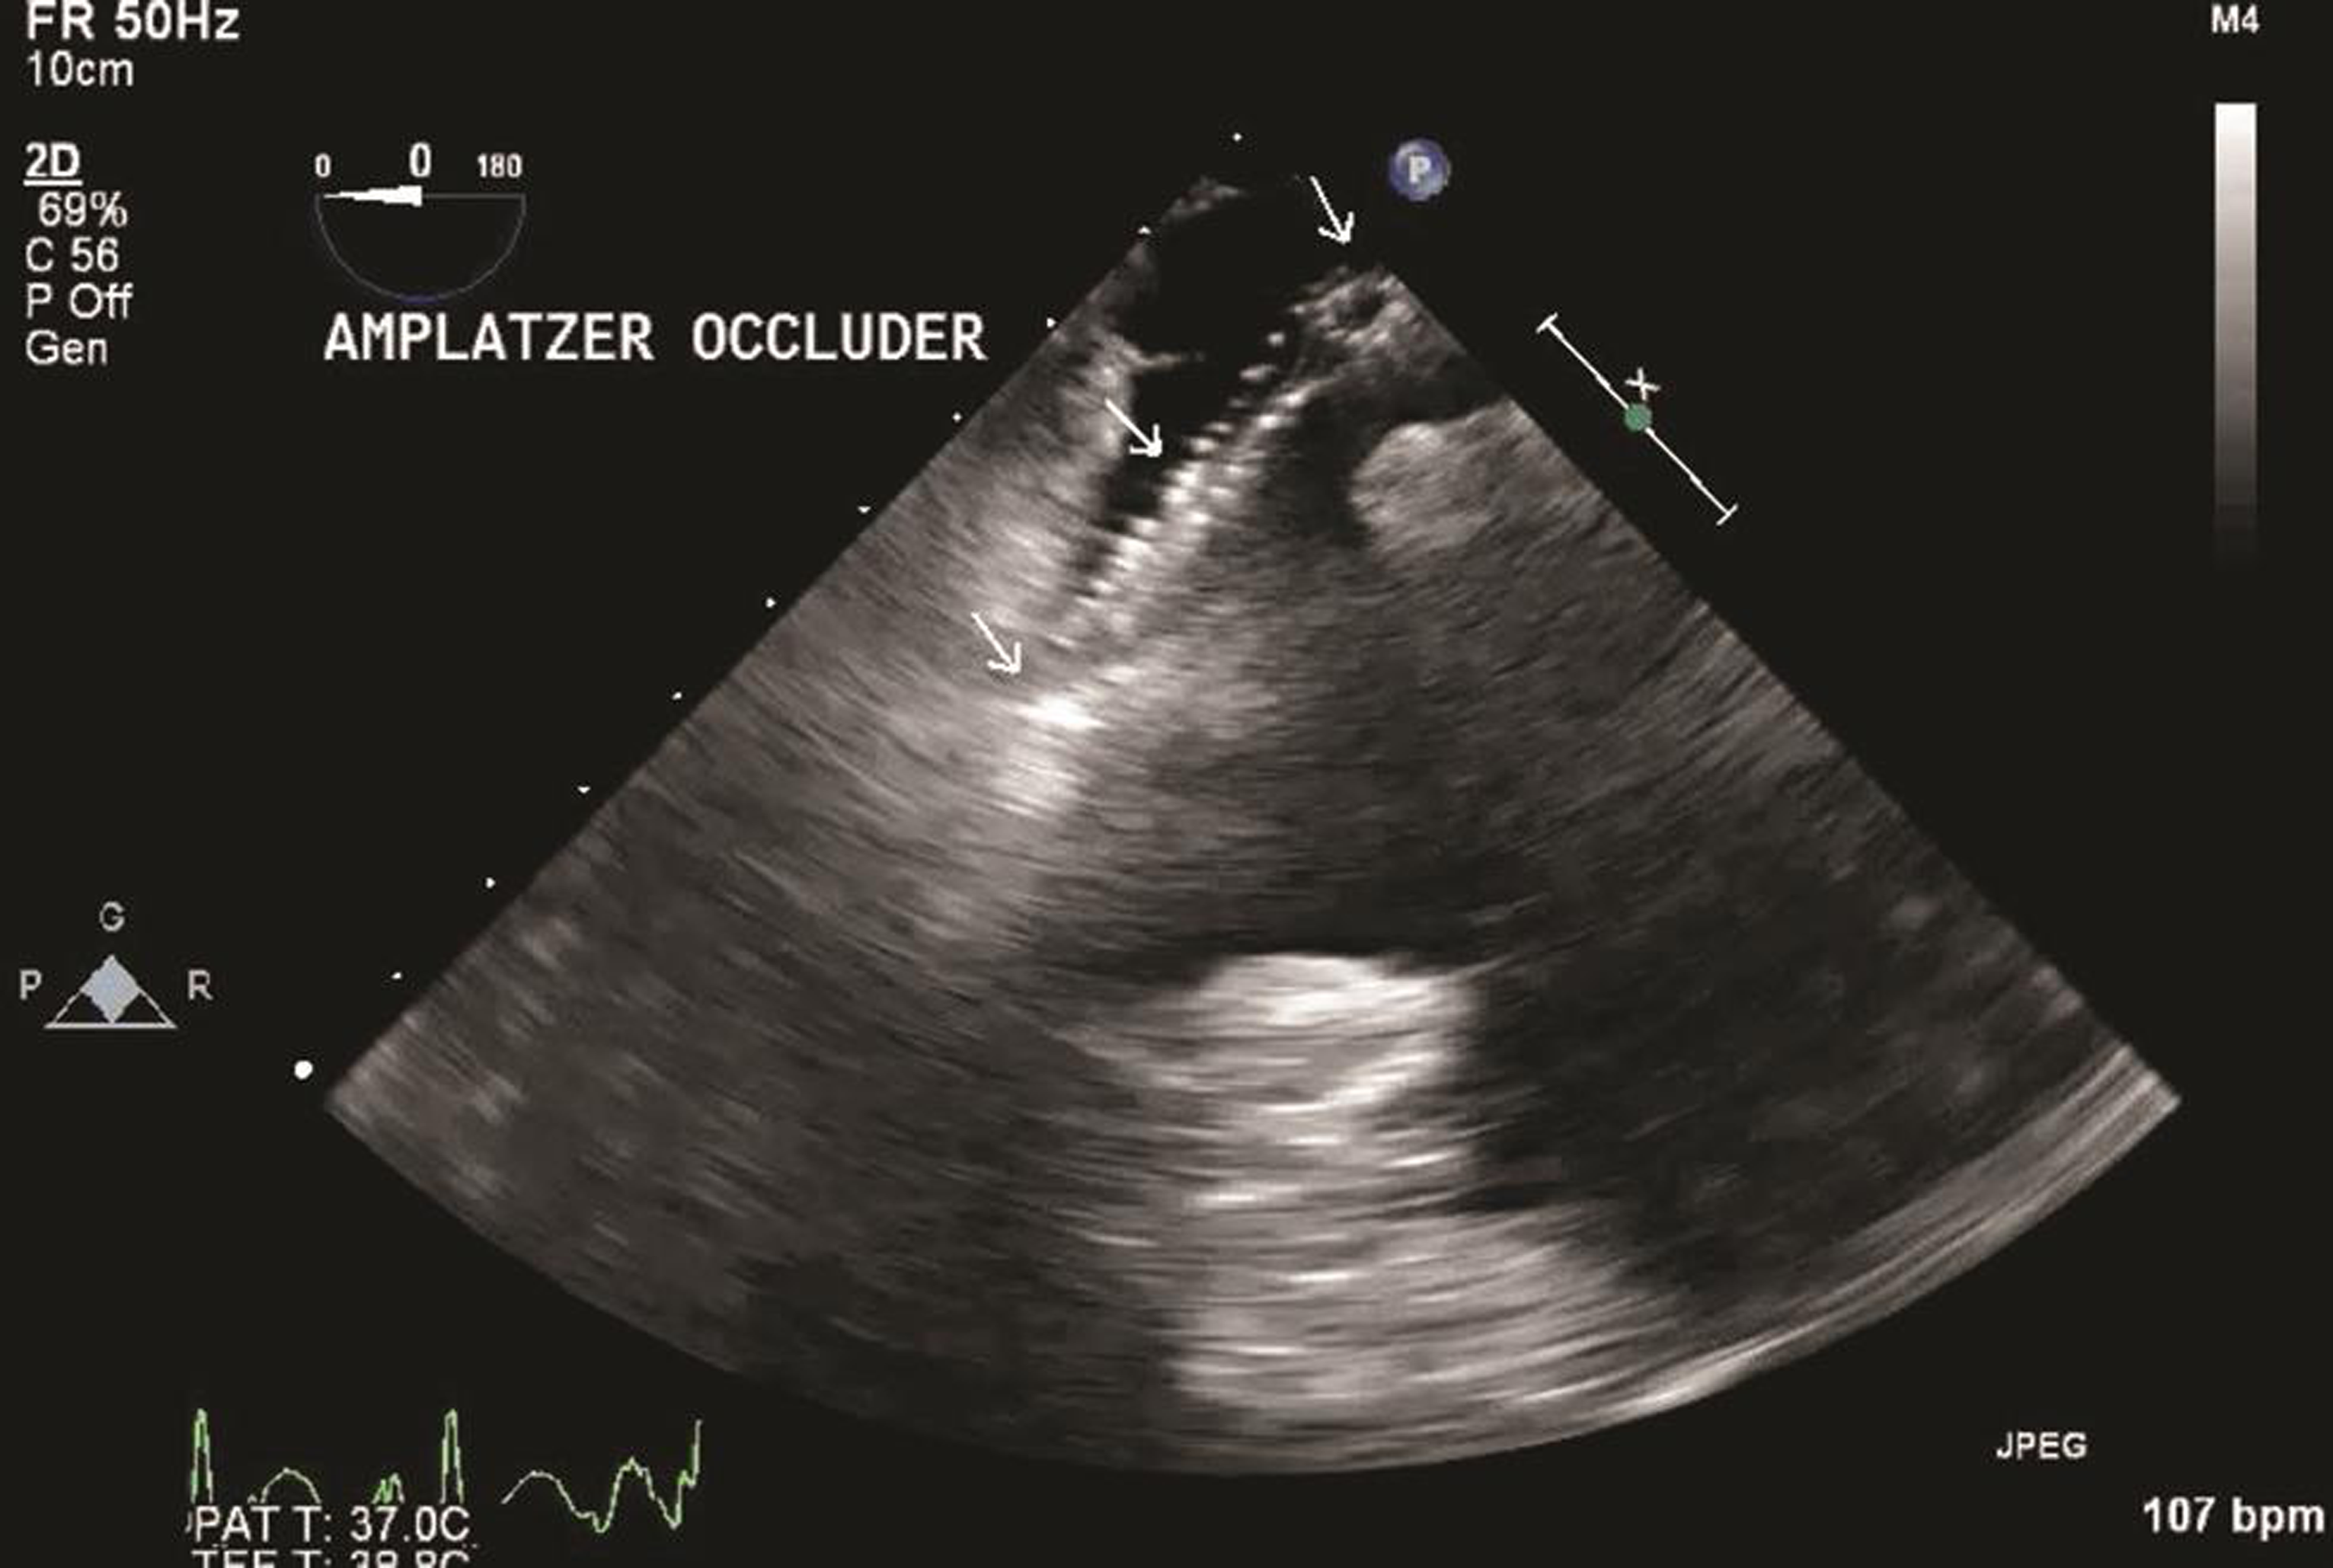 Transesophageal echocardiography midesophageal four-chamber view (probe tilted to right), showing Amplatzer atrial septal device occluder in right atrium and atrial septal defect.